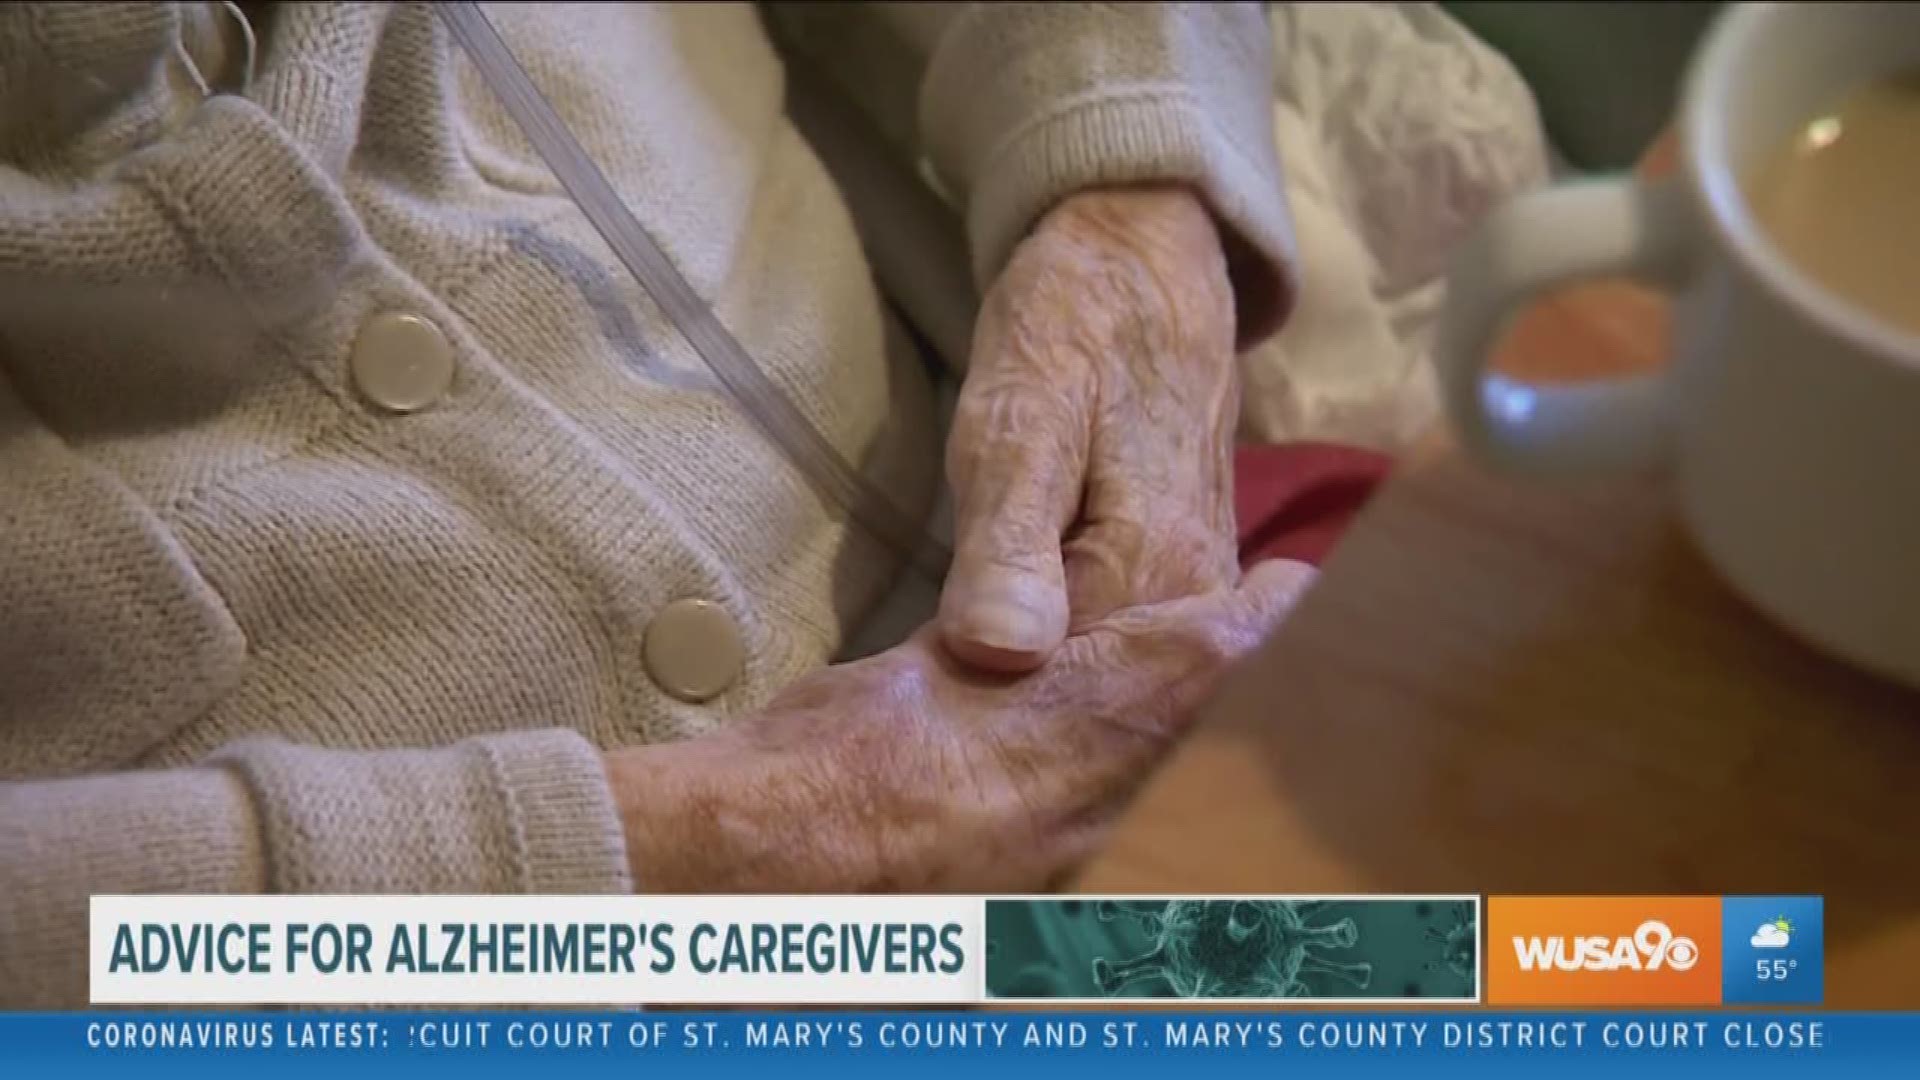 Ana Nelson with the Alzheimer’s Association National Capital Area Chapter offers tips on caring for individuals with Alzheimer's during this pandemic.